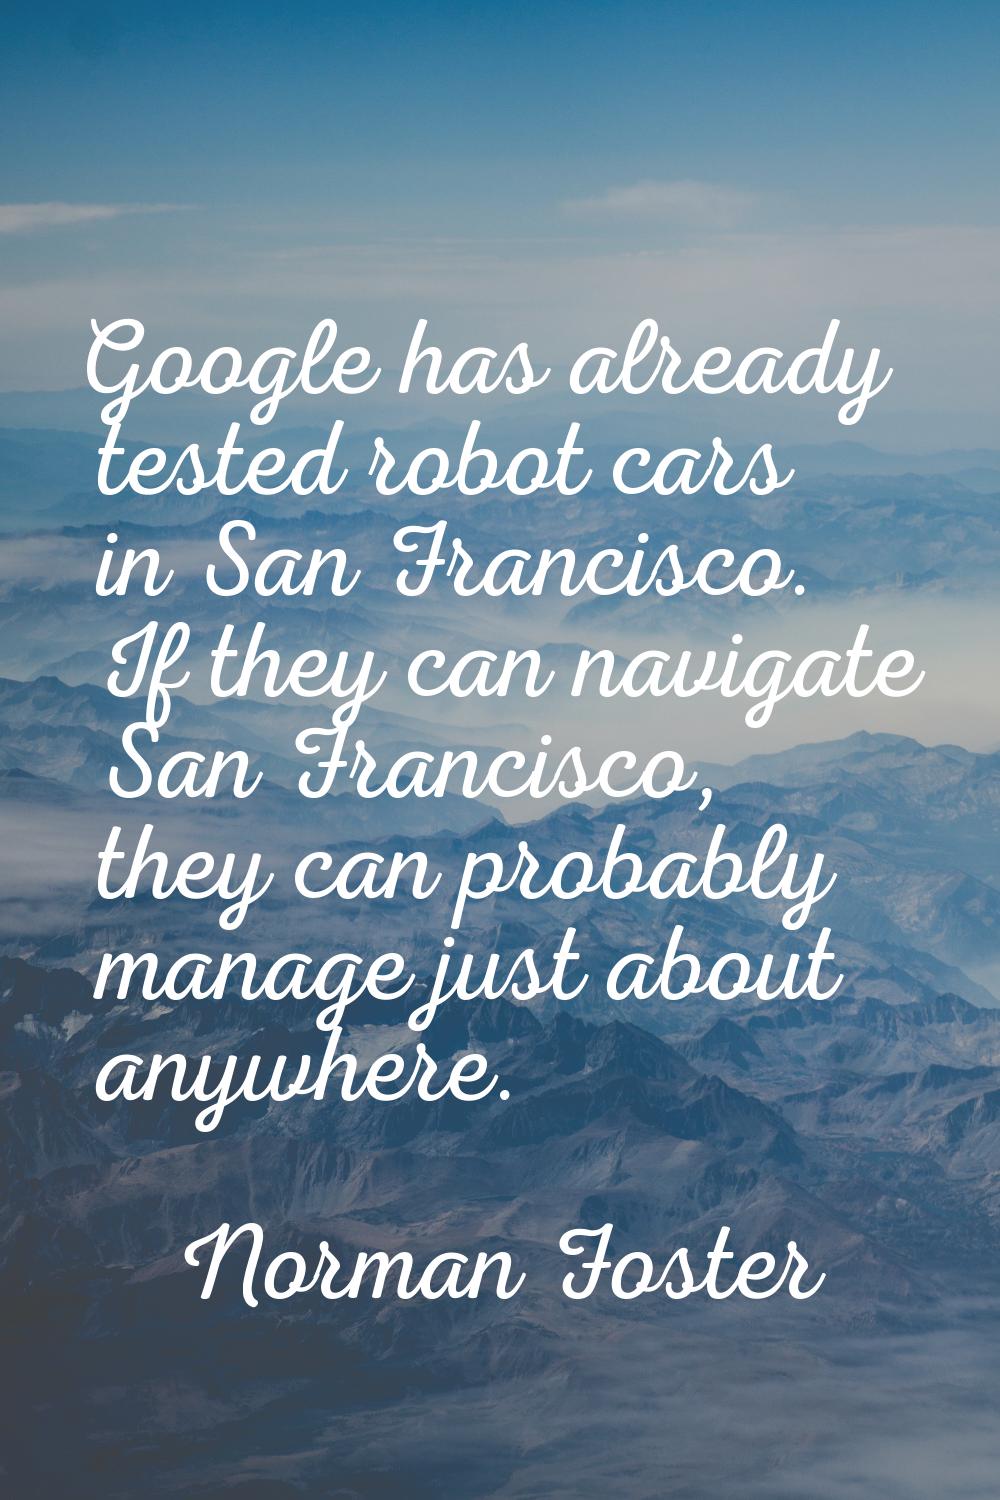 Google has already tested robot cars in San Francisco. If they can navigate San Francisco, they can